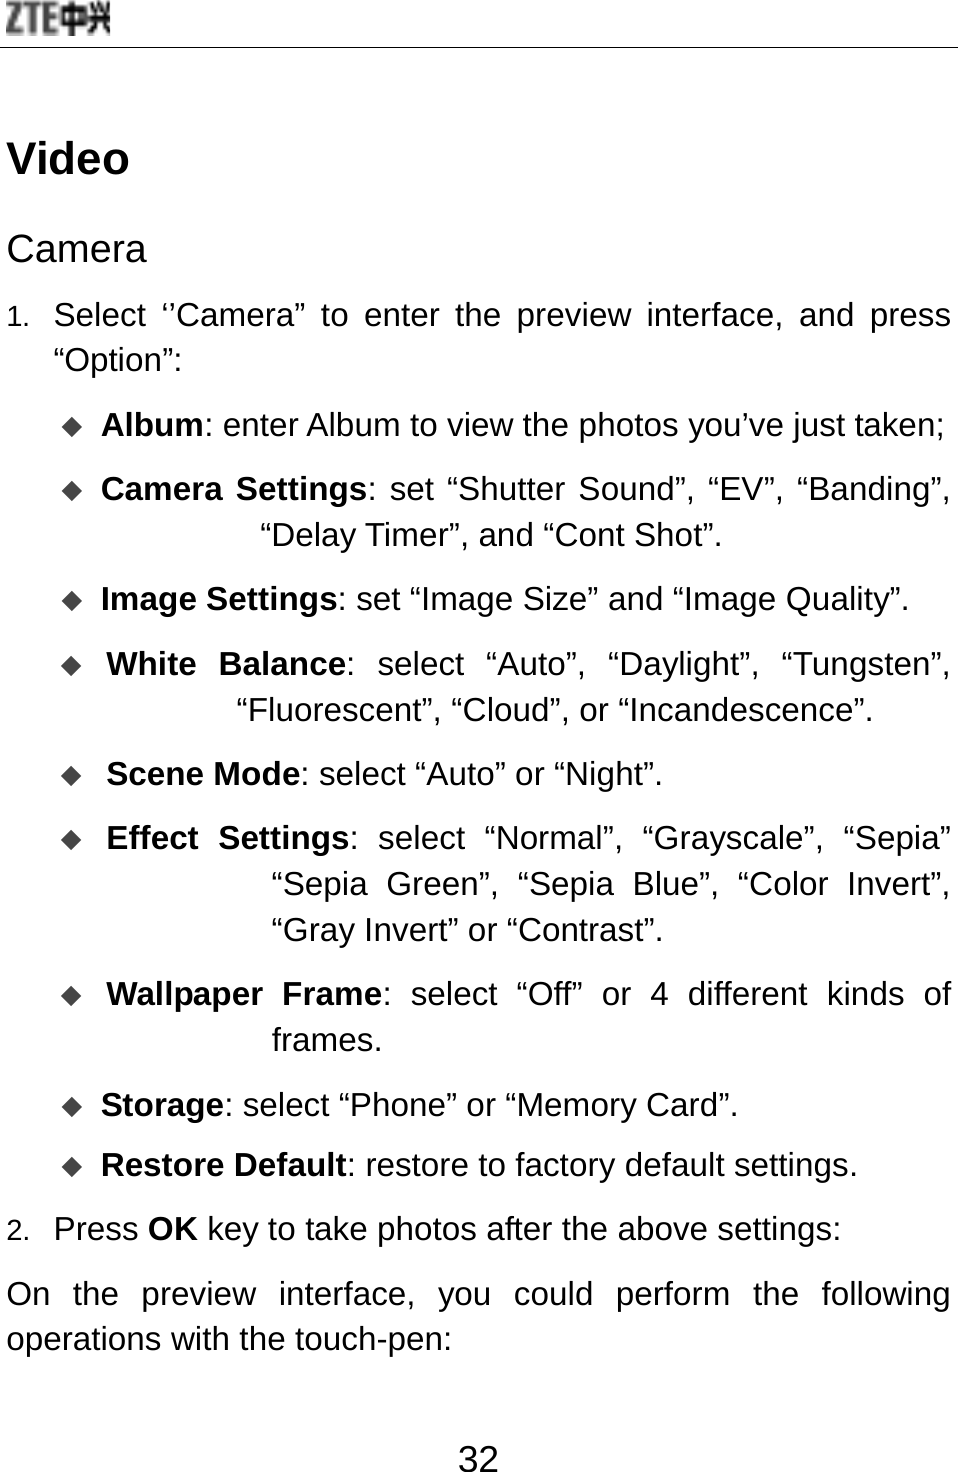  32 Video Camera 1.  Select ‘’Camera” to enter the preview interface, and press “Option”:  Album: enter Album to view the photos you’ve just taken;  Camera Settings: set “Shutter Sound”, “EV”, “Banding”, “Delay Timer”, and “Cont Shot”.  Image Settings: set “Image Size” and “Image Quality”.  White Balance: select “Auto”, “Daylight”, “Tungsten”, “Fluorescent”, “Cloud”, or “Incandescence”.  Scene Mode: select “Auto” or “Night”.  Effect Settings: select “Normal”, “Grayscale”, “Sepia” “Sepia Green”, “Sepia Blue”, “Color Invert”, “Gray Invert” or “Contrast”.  Wallpaper Frame: select “Off” or 4 different kinds of frames.  Storage: select “Phone” or “Memory Card”.  Restore Default: restore to factory default settings. 2.  Press OK key to take photos after the above settings:   On the preview interface, you could perform the following operations with the touch-pen: 